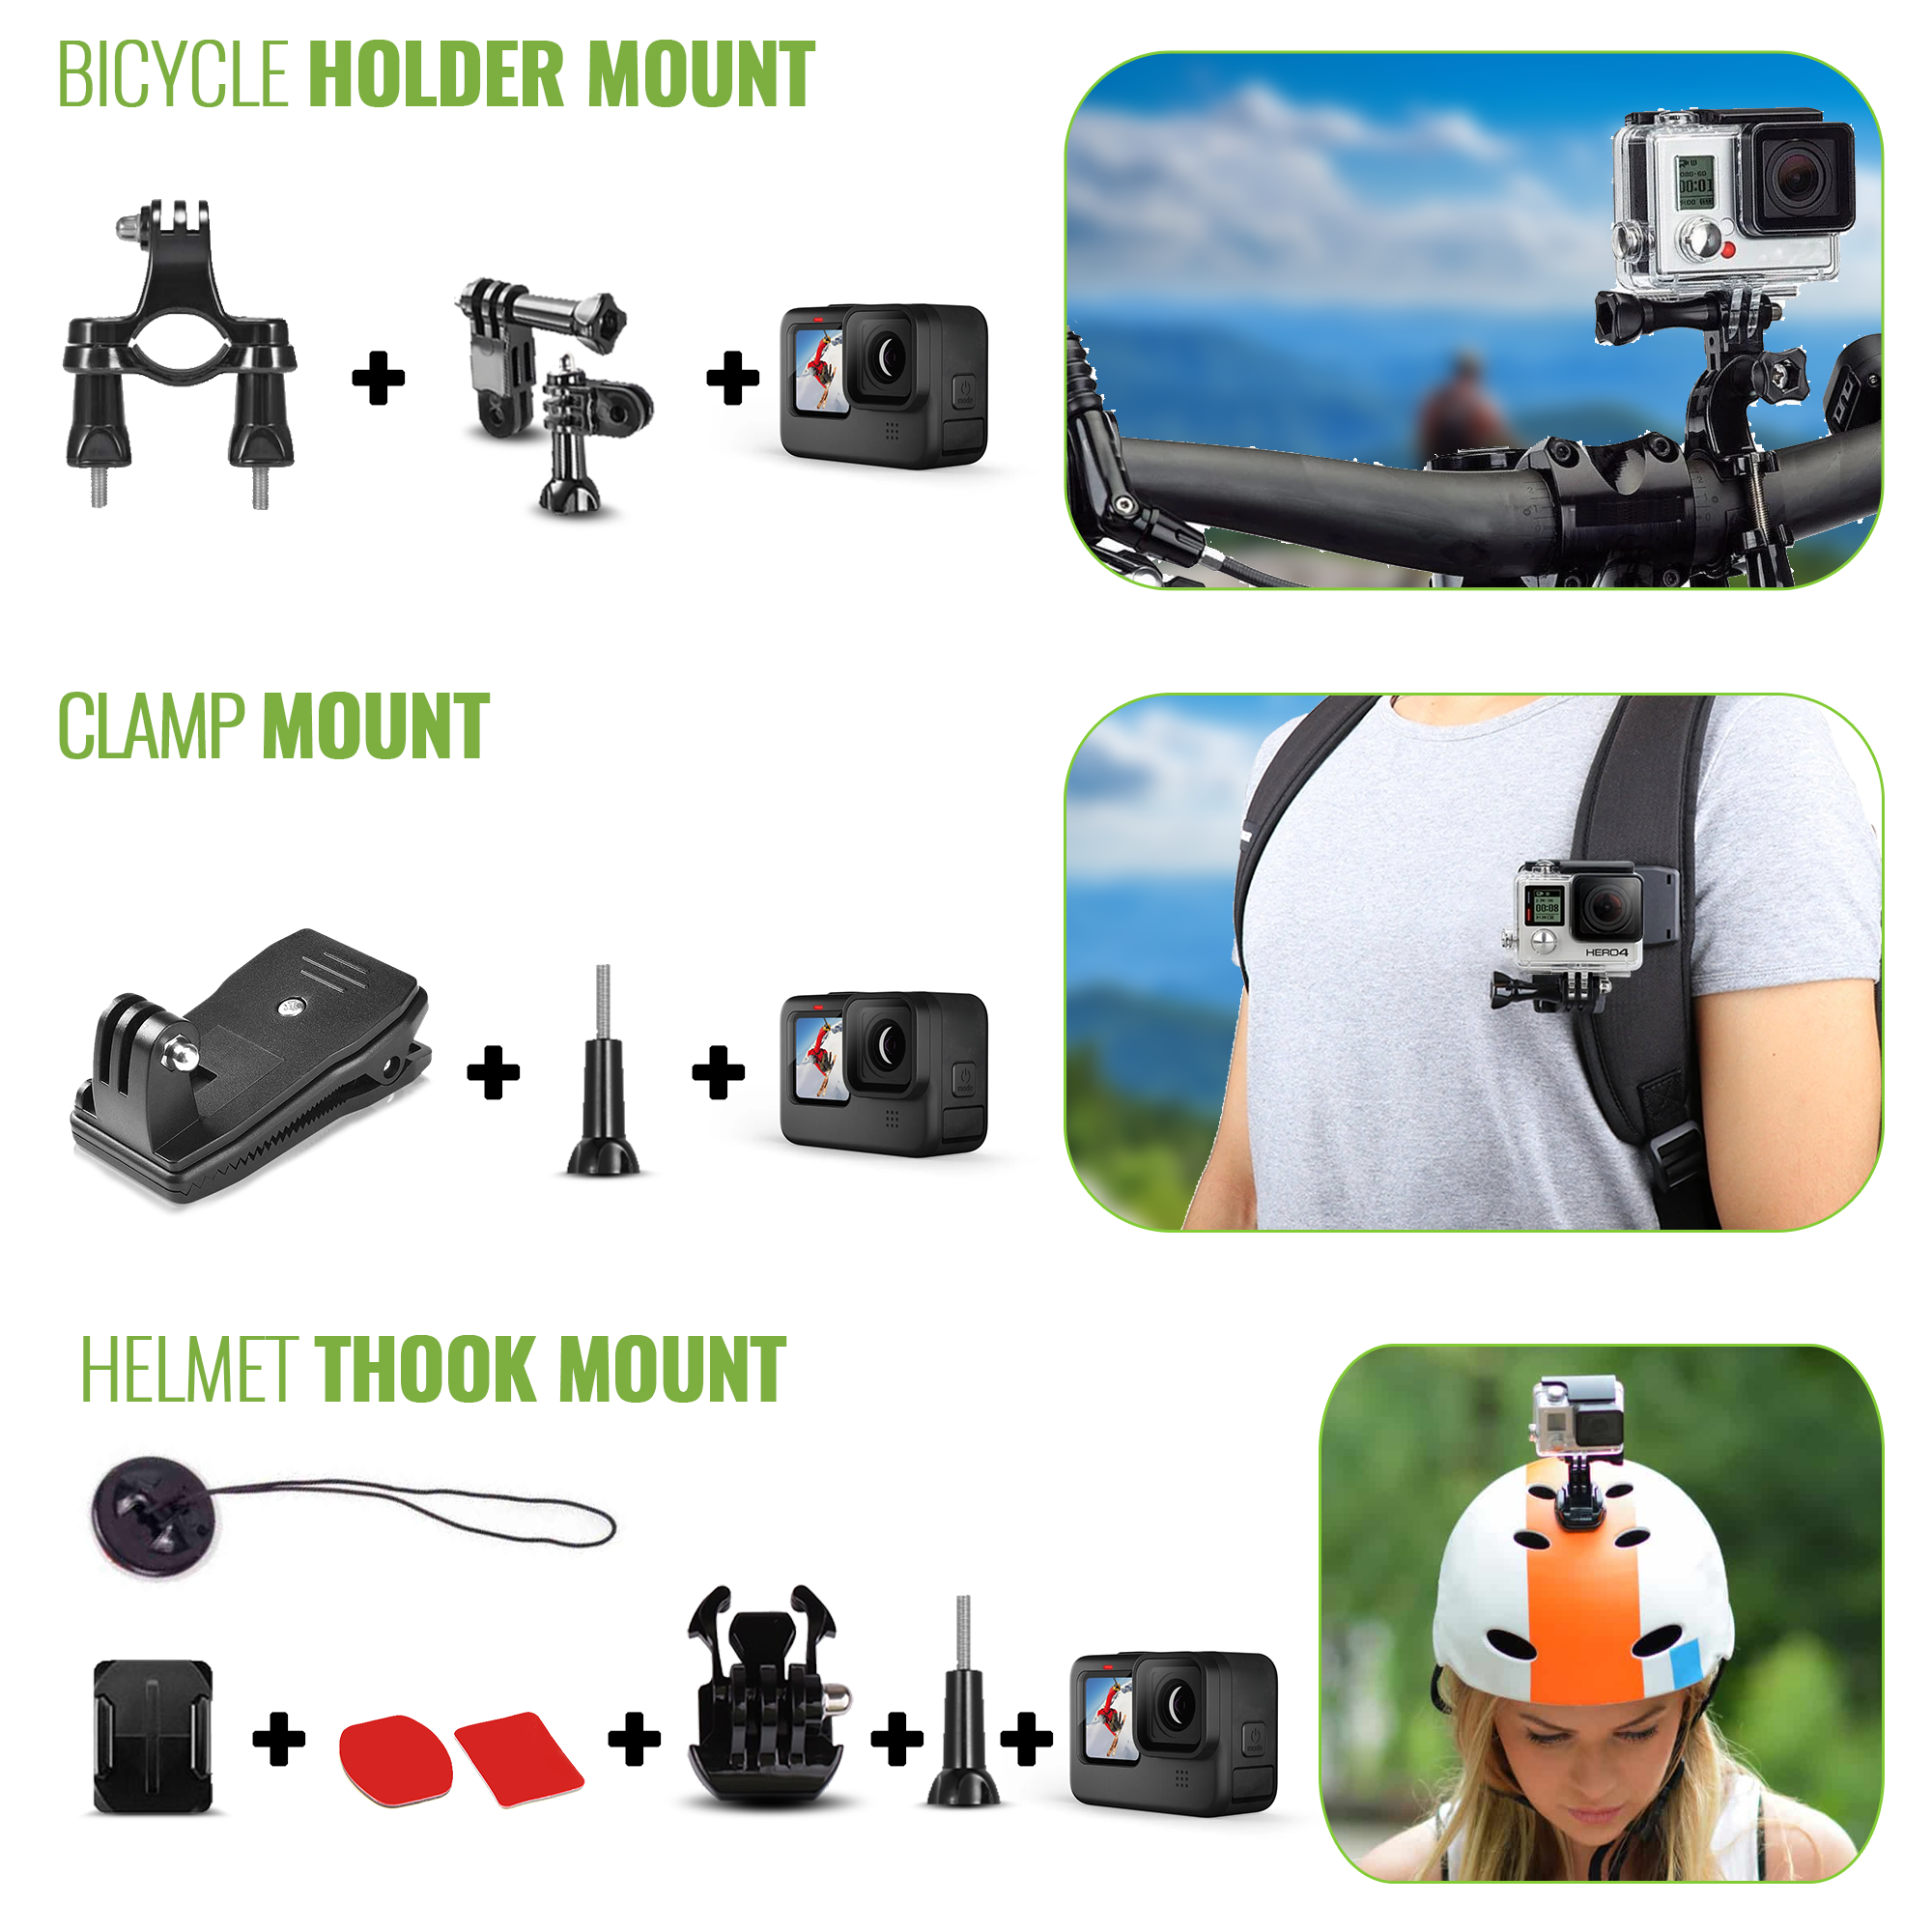 DigiNerds 50 in 1 Action Camera Accessory kit For Gopro and More.